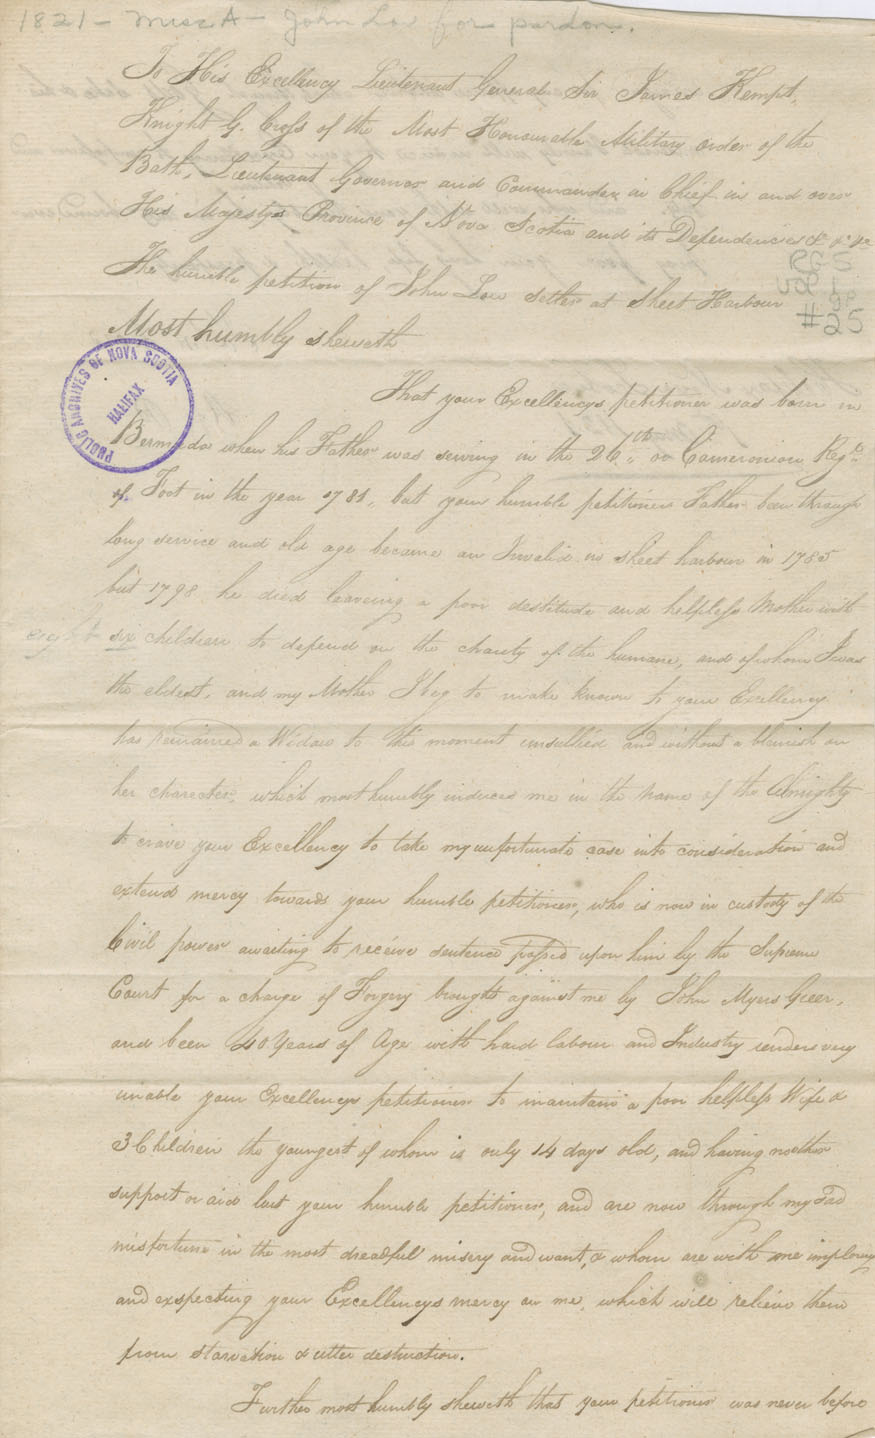 assembly : Petition of John Low, Sheet Harbour, native of Bermuda, for pardon of charge of forgery brought against him by John Myers Geer.